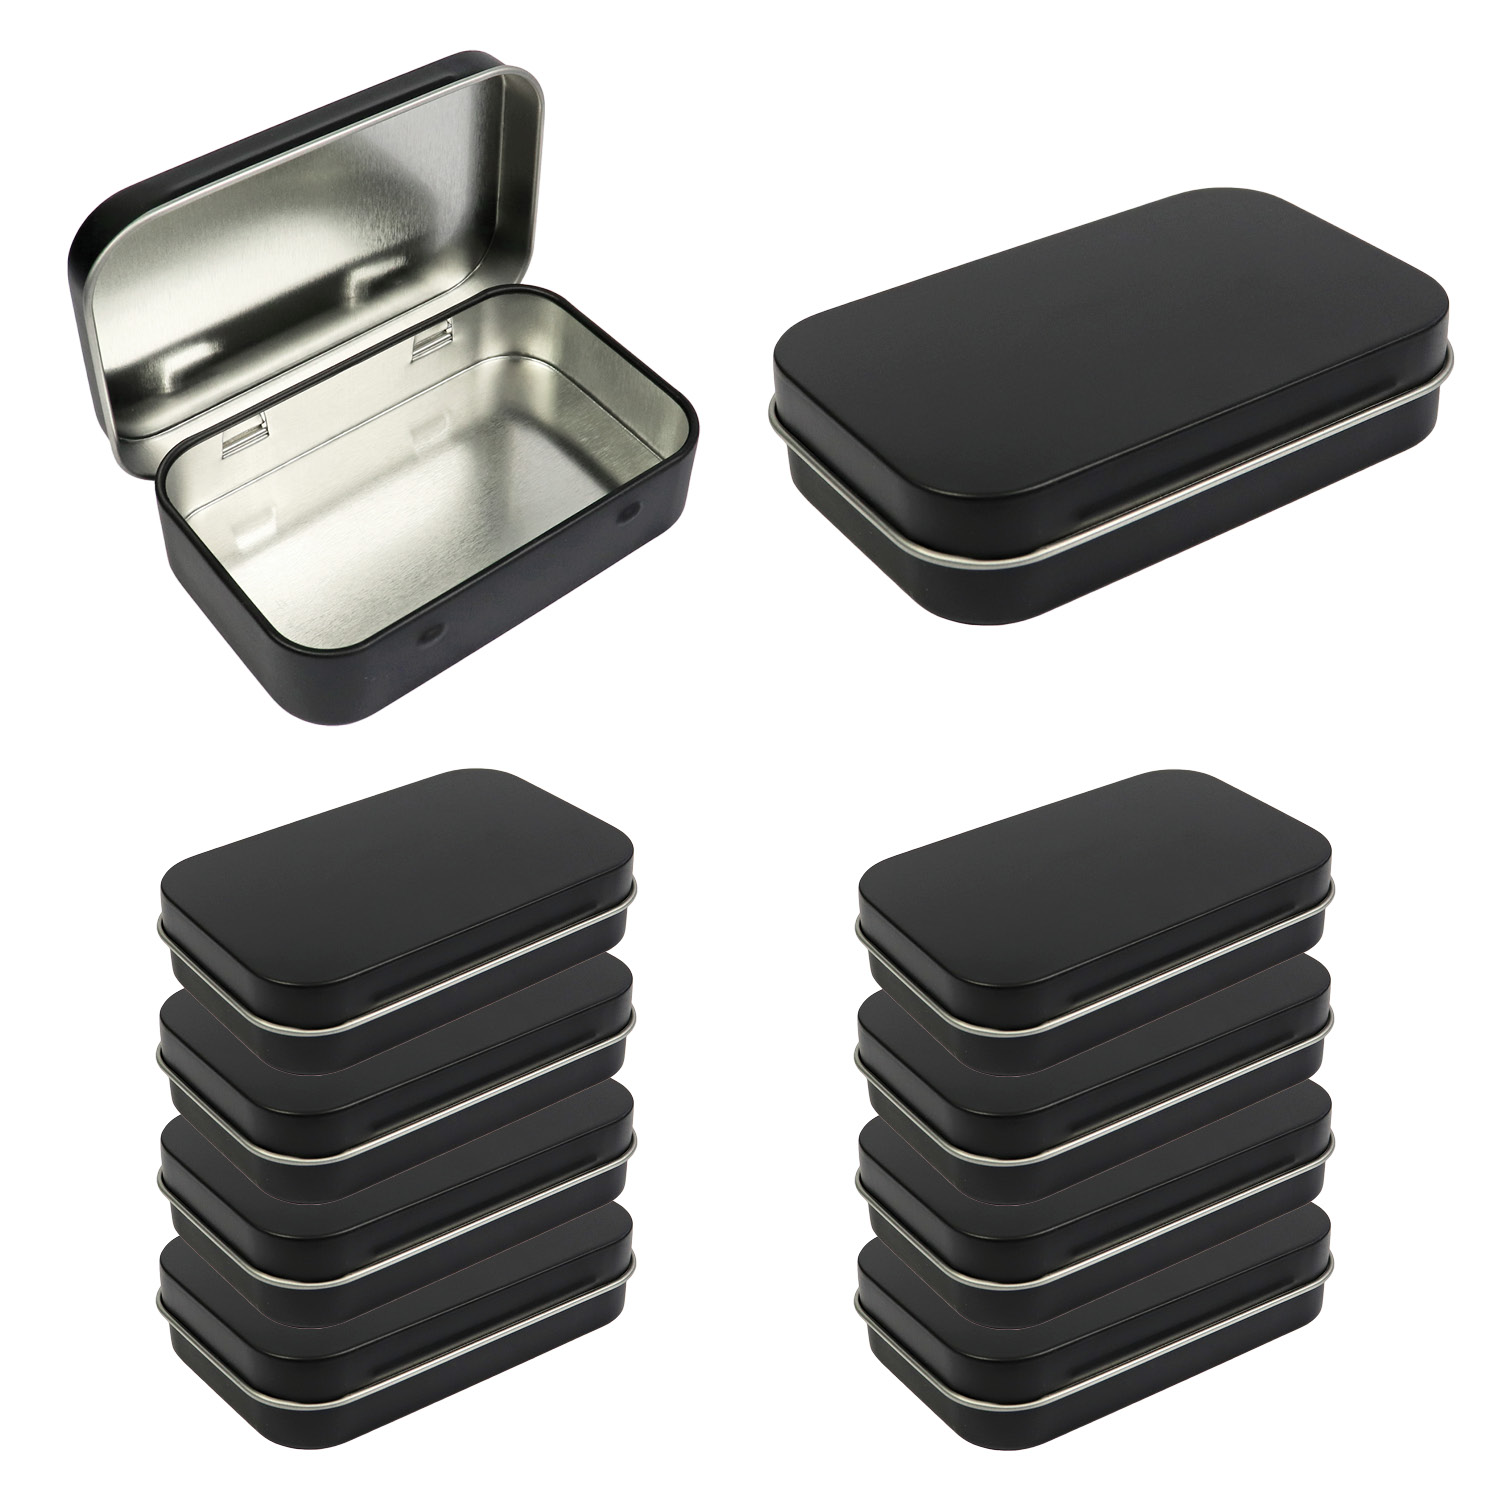 10 Pack Metal Rectangular Empty Hinged Tins Box Containers 3.75 by 2.45 by  0.8 Inch Black Mini Portable Box Small Storage Kit Home Organizer (10